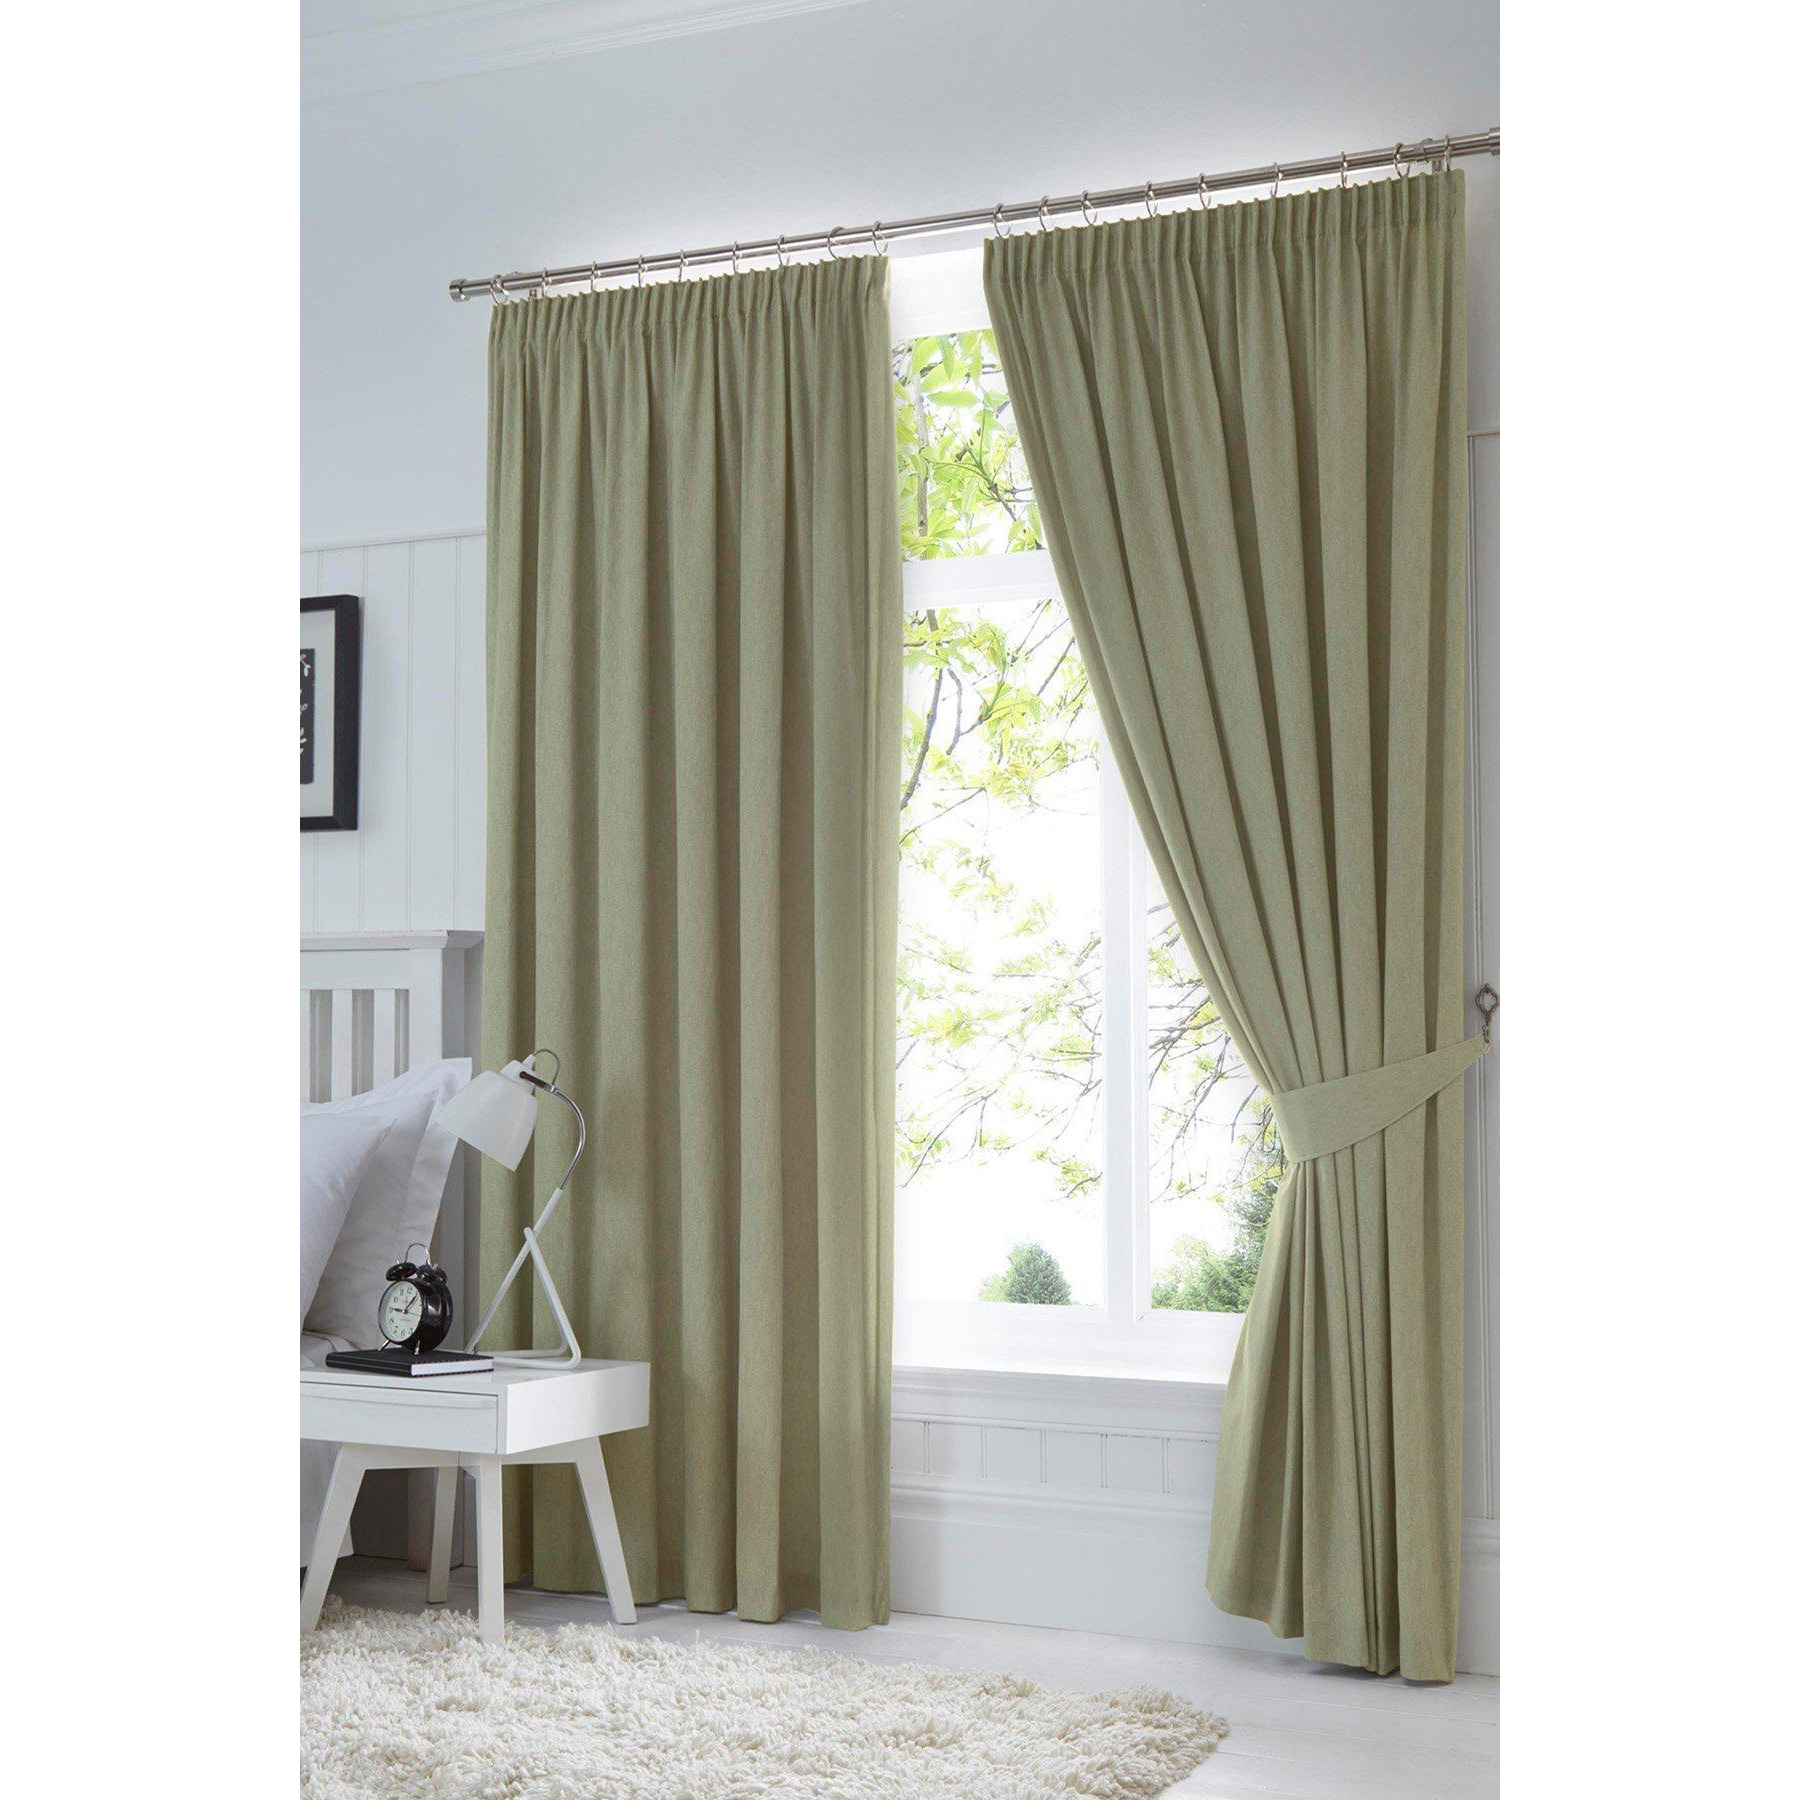 'Dijon' Thermal and Blackout Fully Lined Pencil Pleat Curtains - image 1